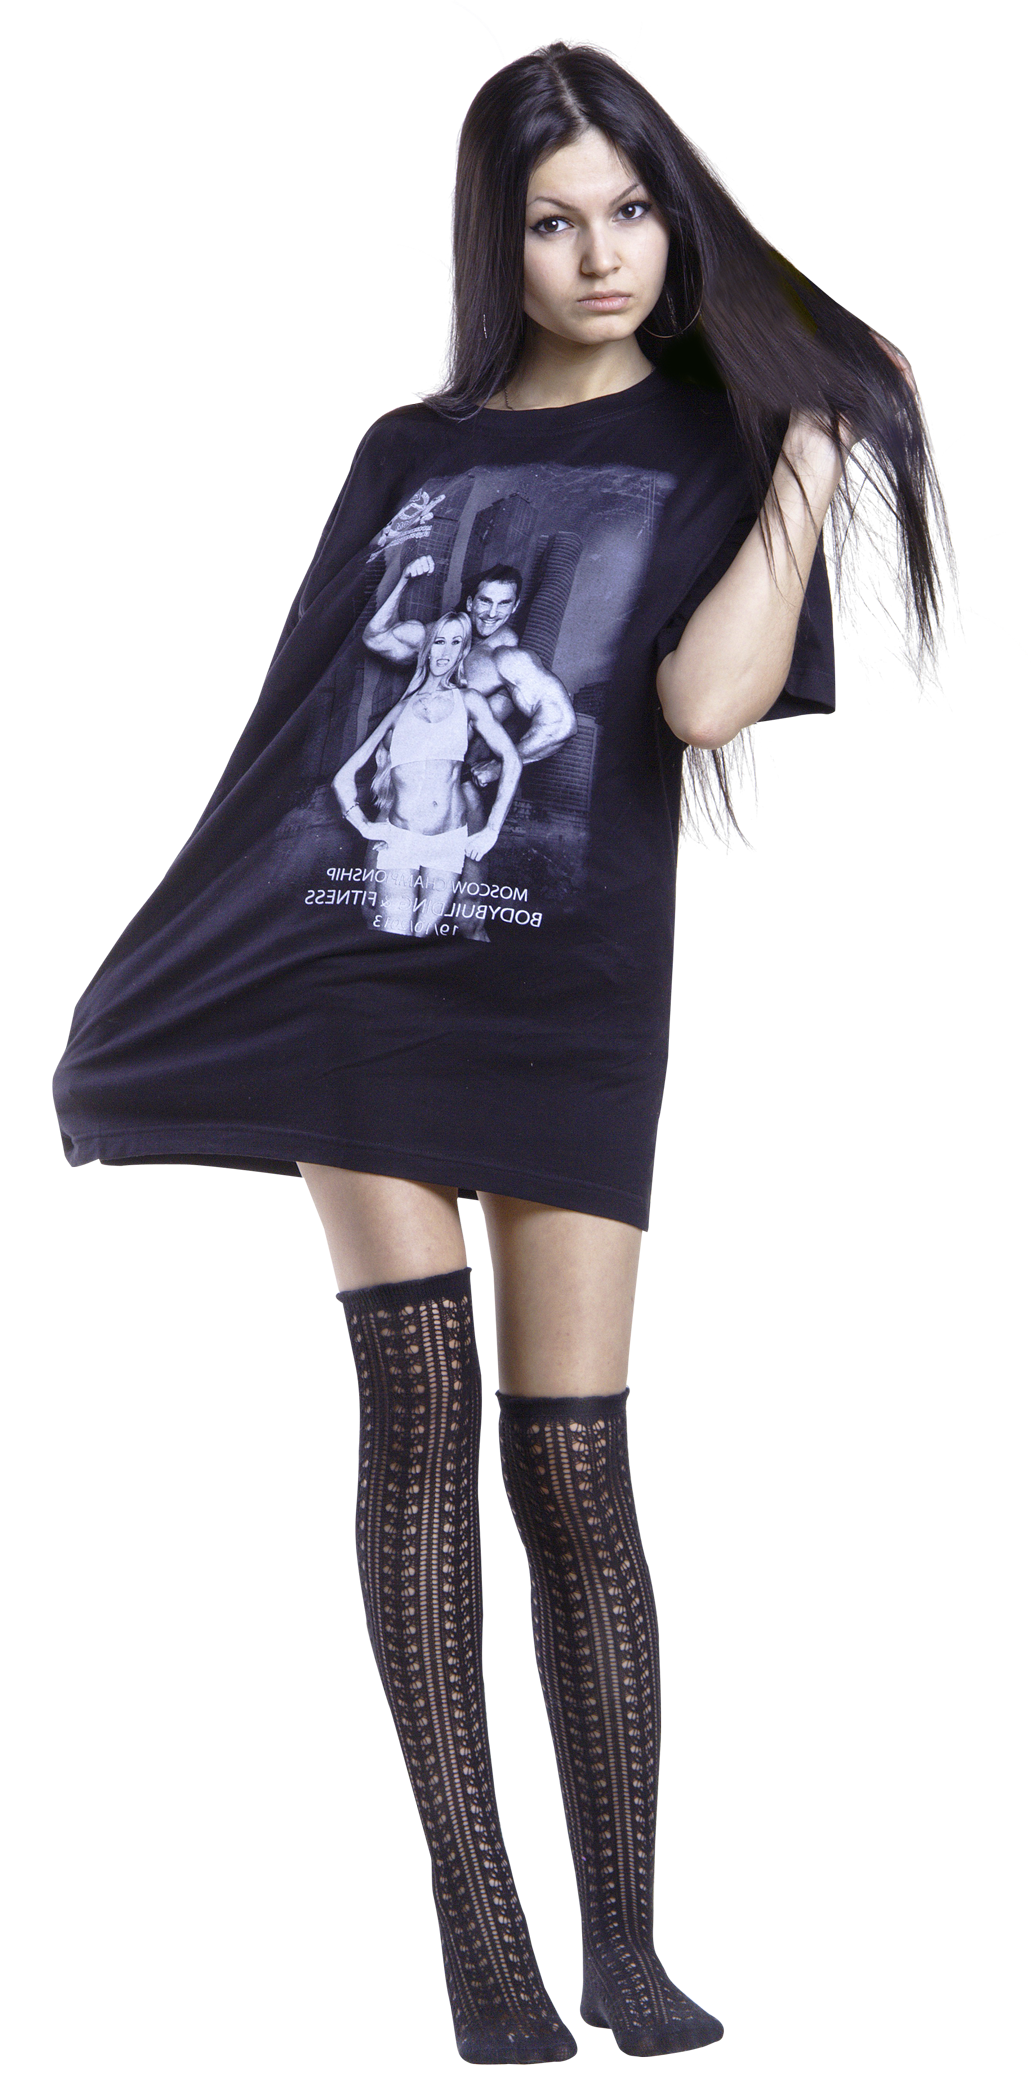 Fashionable Young Girl in Black Socks PNG Image - PngPix